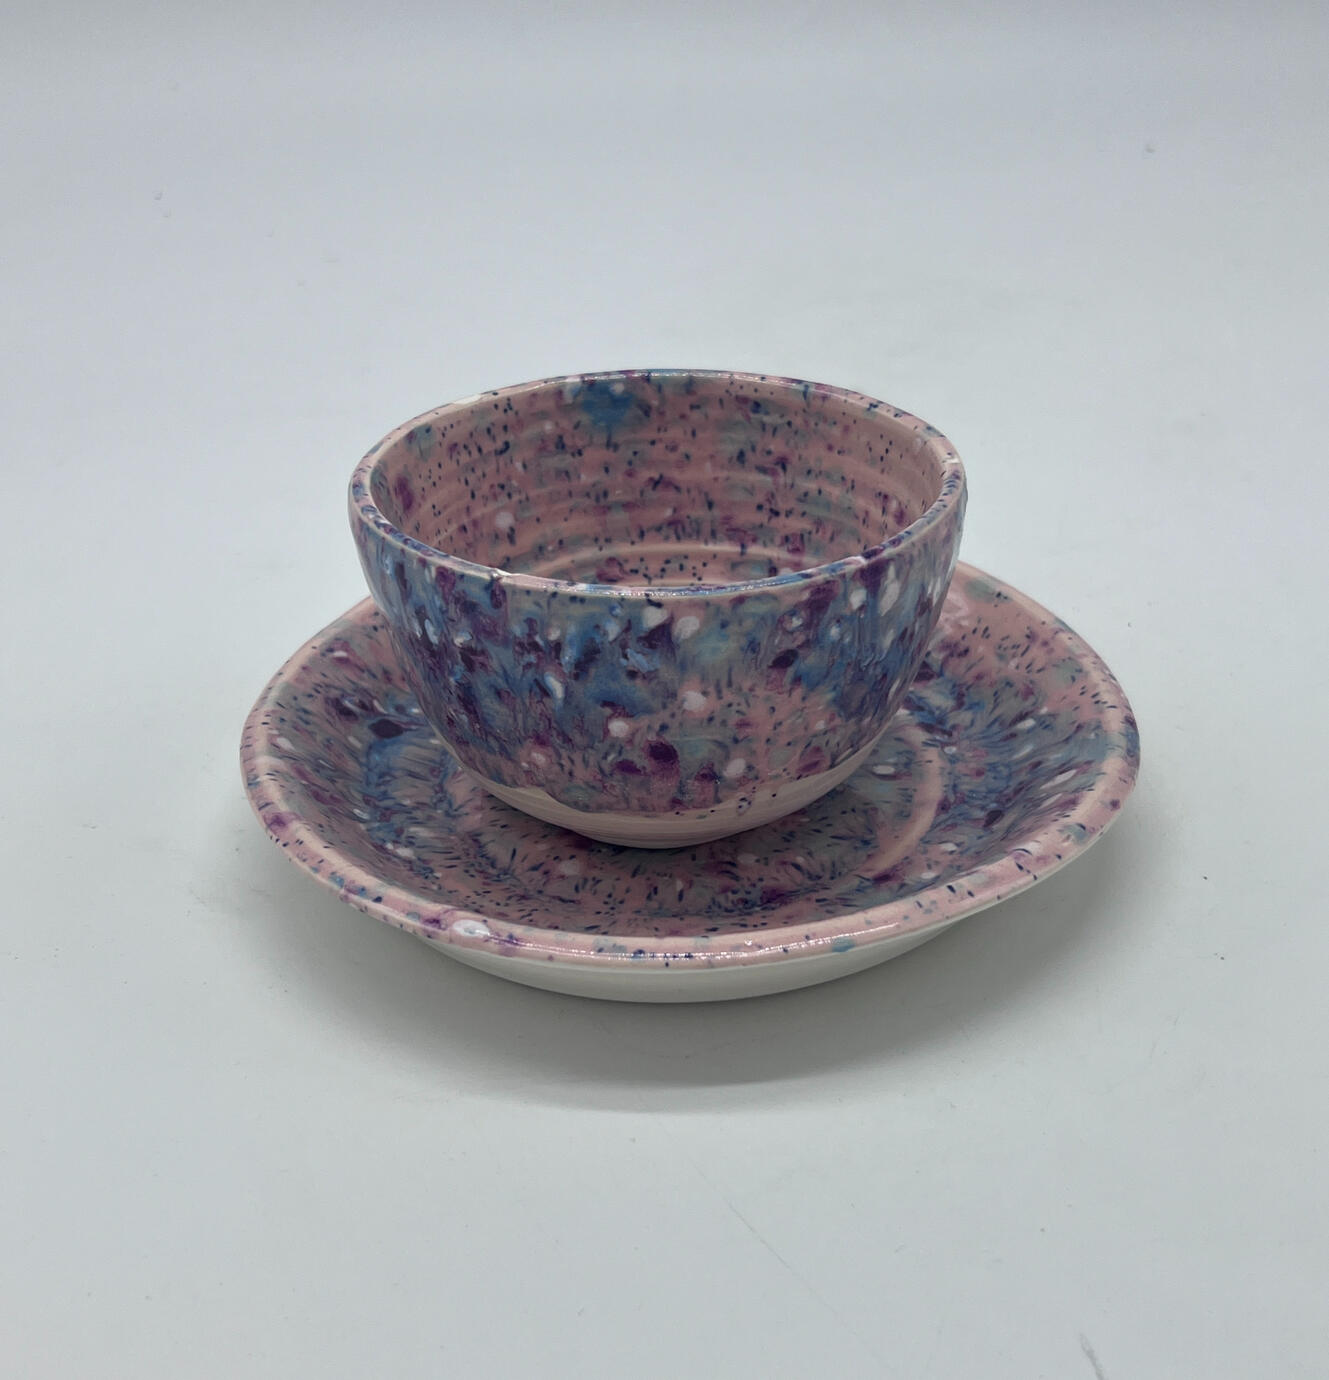 Cotton Candy Bowl and Plate